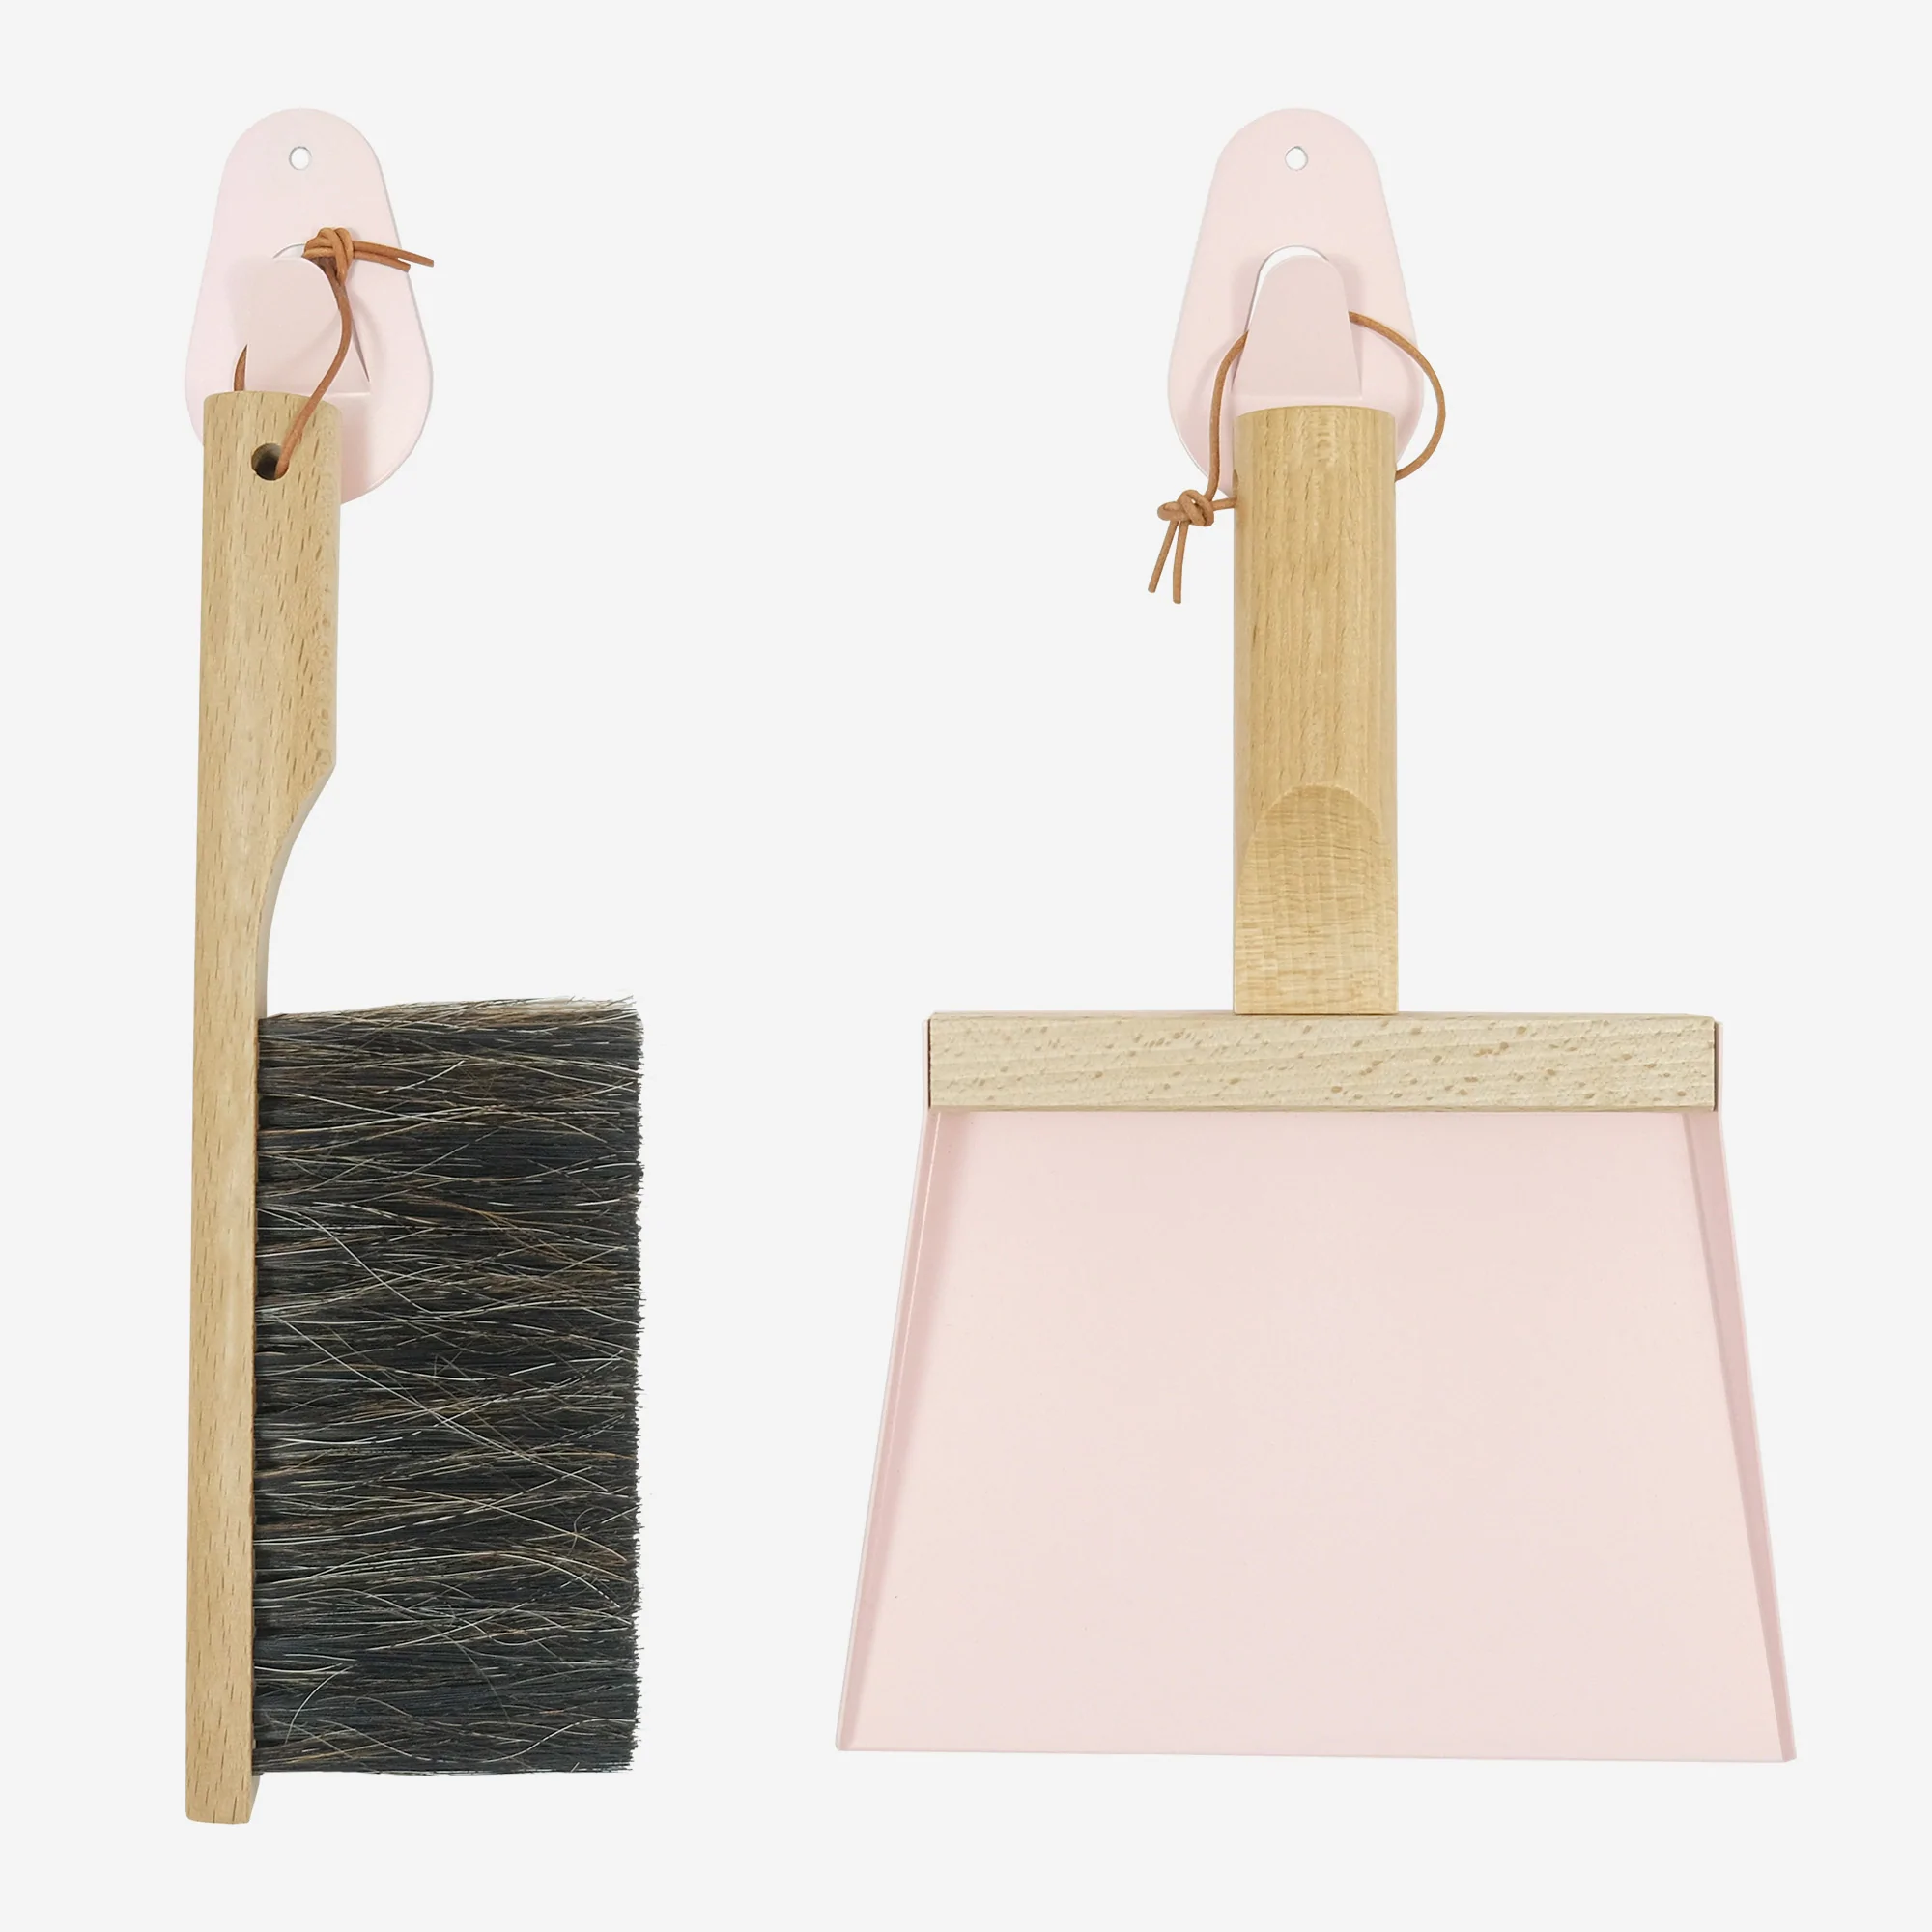 Andrée Jardin Mr. and Mrs. Clynk Dustpan & Brush "Coffret" Gift Set with Wall Hooks Light Pink Utilities Andrée Jardin Brand_Andrée Jardin Home_Broom Sets Home_Household Cleaning New Arrivals ROSE_2000x2000AndreeJardinMr.andMrs.ClynkDustpan_Brush_Coffret_GiftSetwithWallHookslightpink